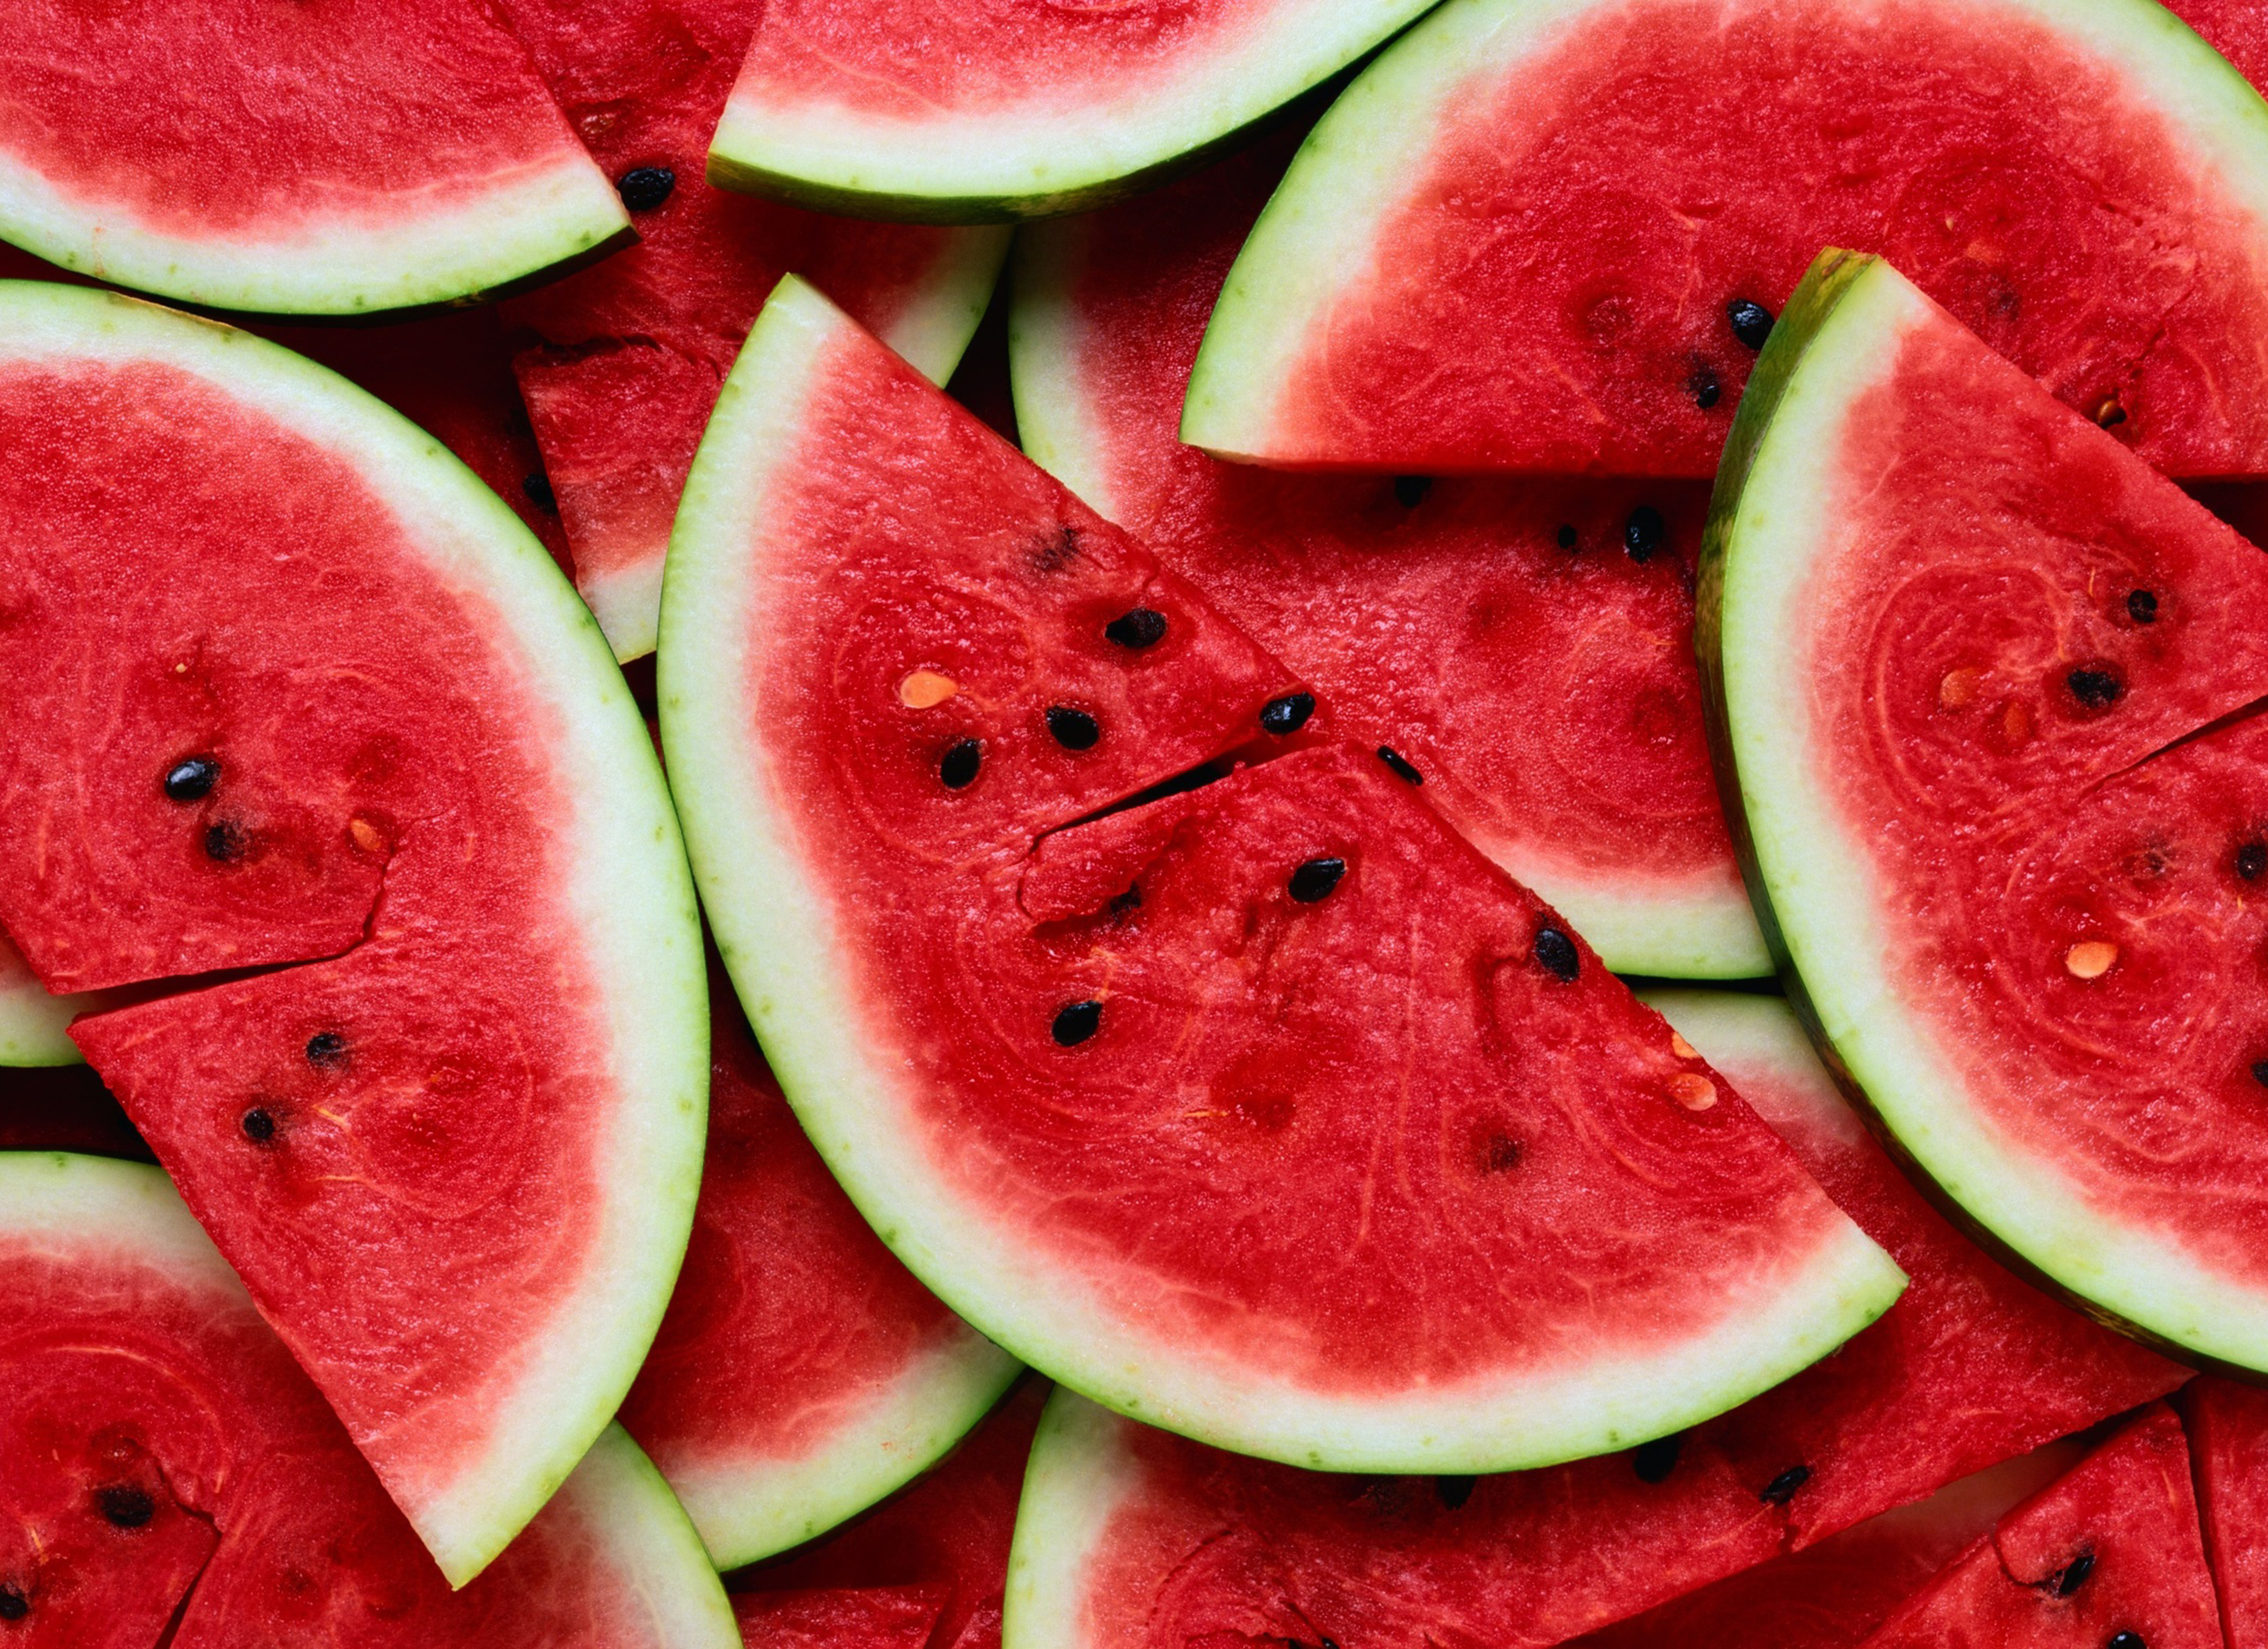 125538 download wallpaper food, red, berry, watermelon, ripe, juicy screensavers and pictures for free